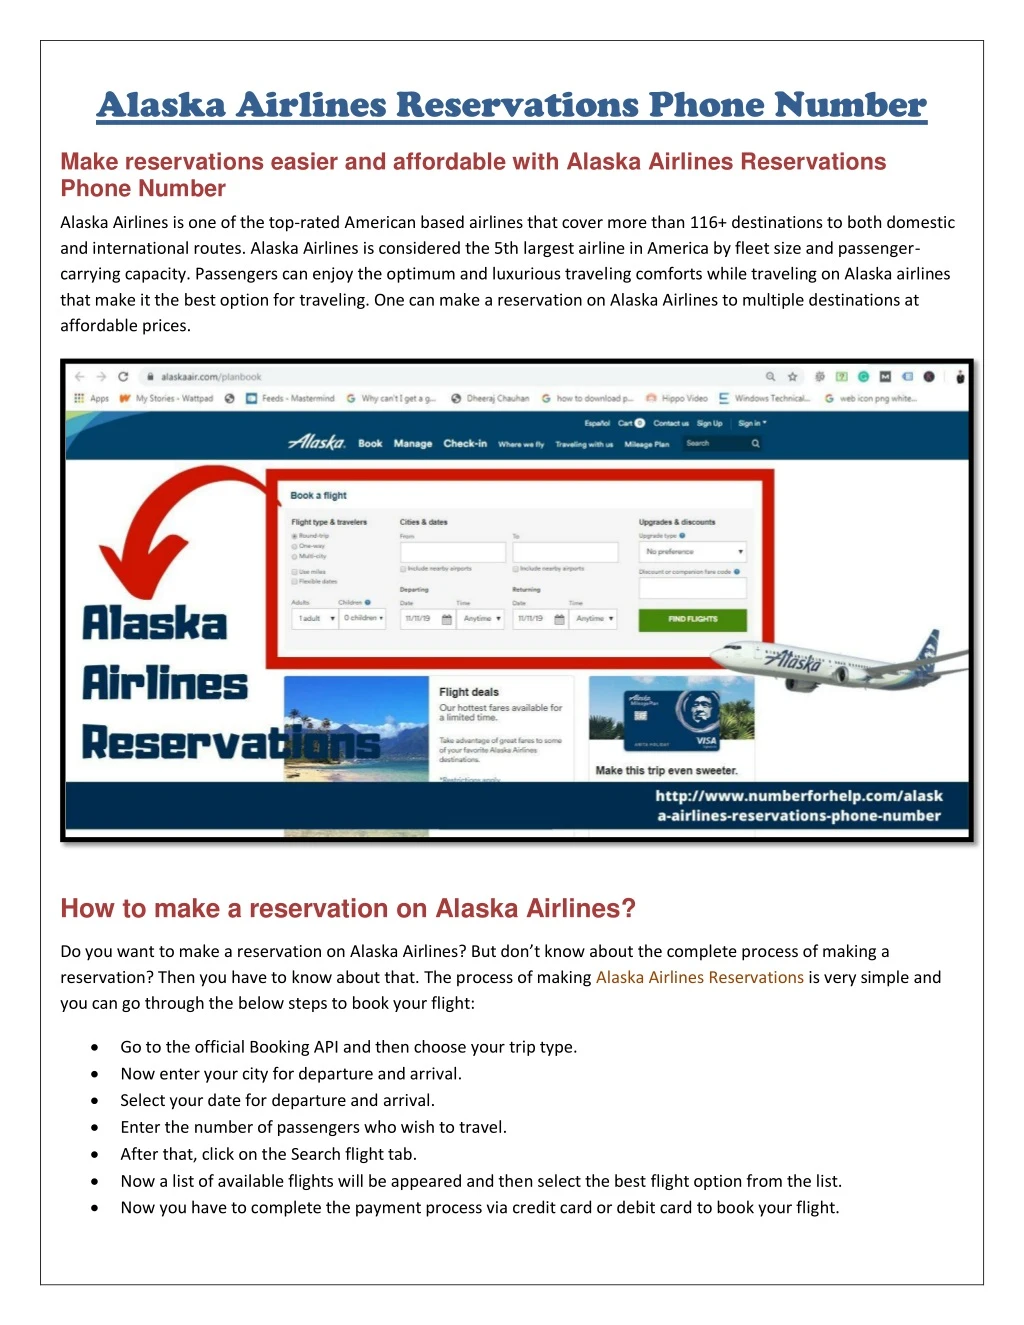 PPT Alaska Airlines Reservations Phone Number PowerPoint Presentation